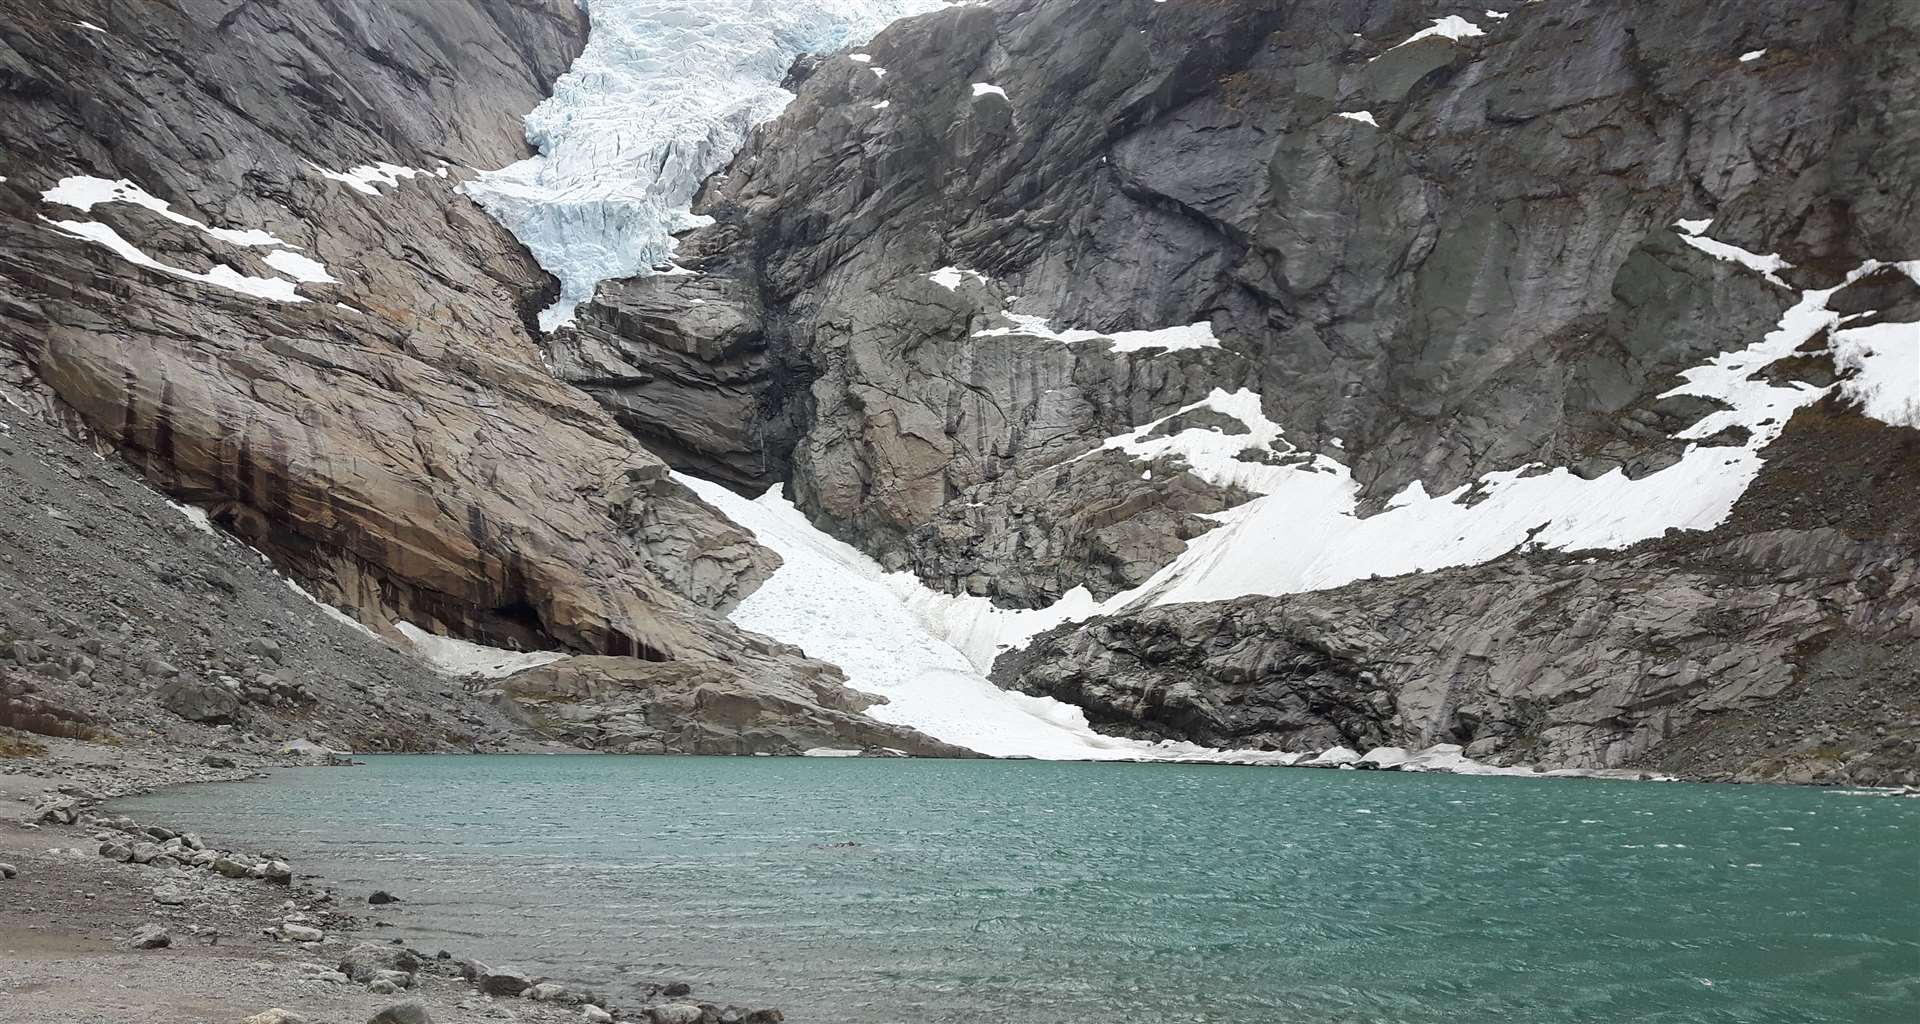 One of the most unspoilt places in the world, the Briksdal Glacier